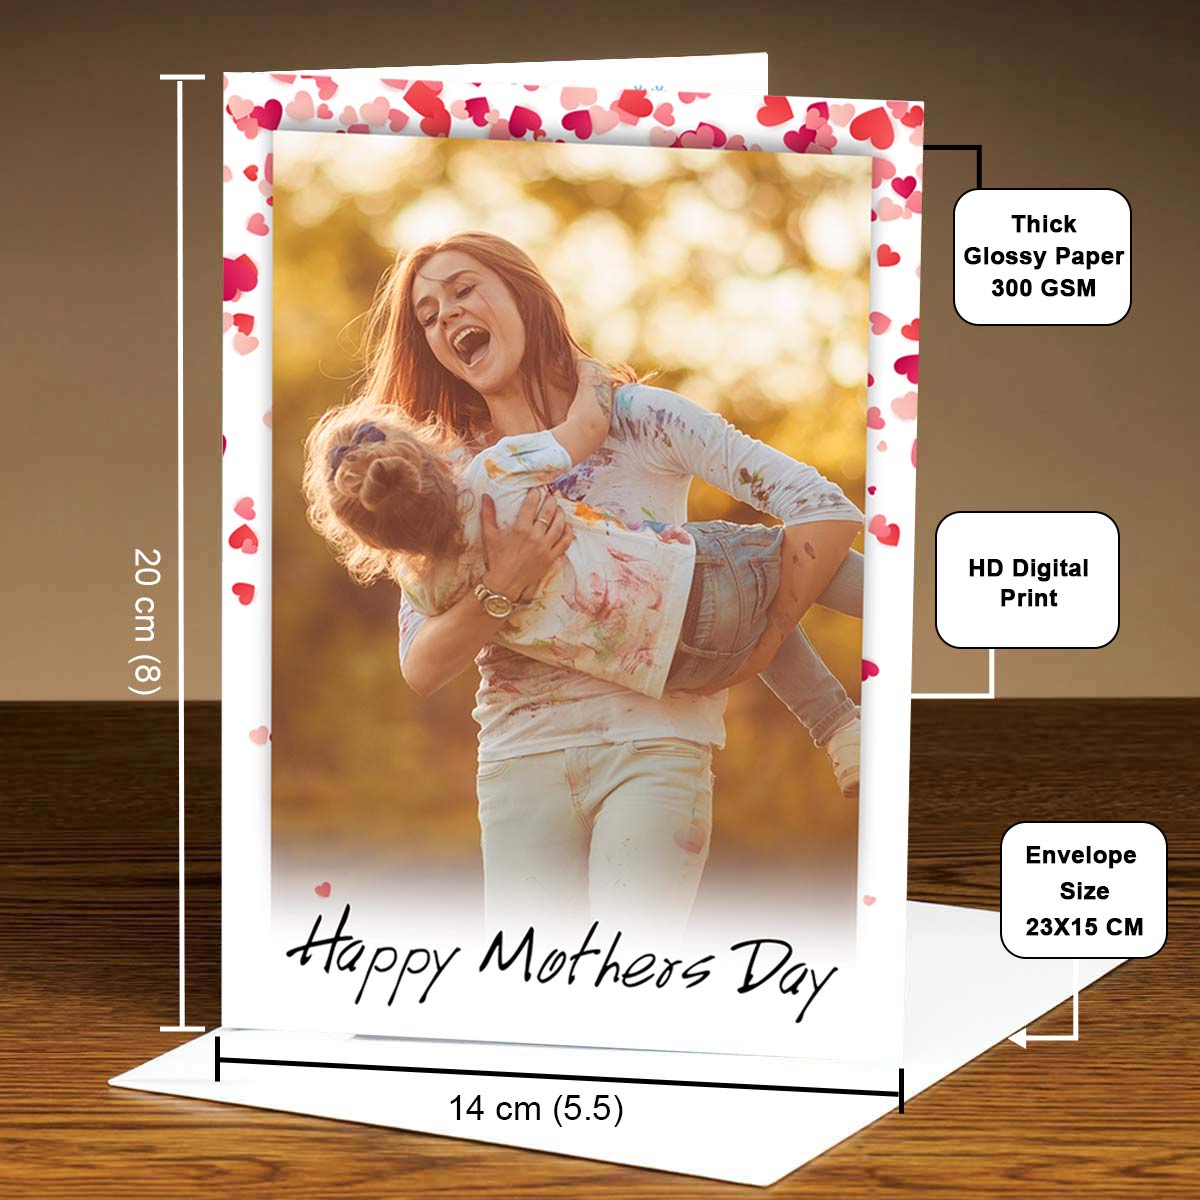 Customised Greeting Card for Mother's Day-4